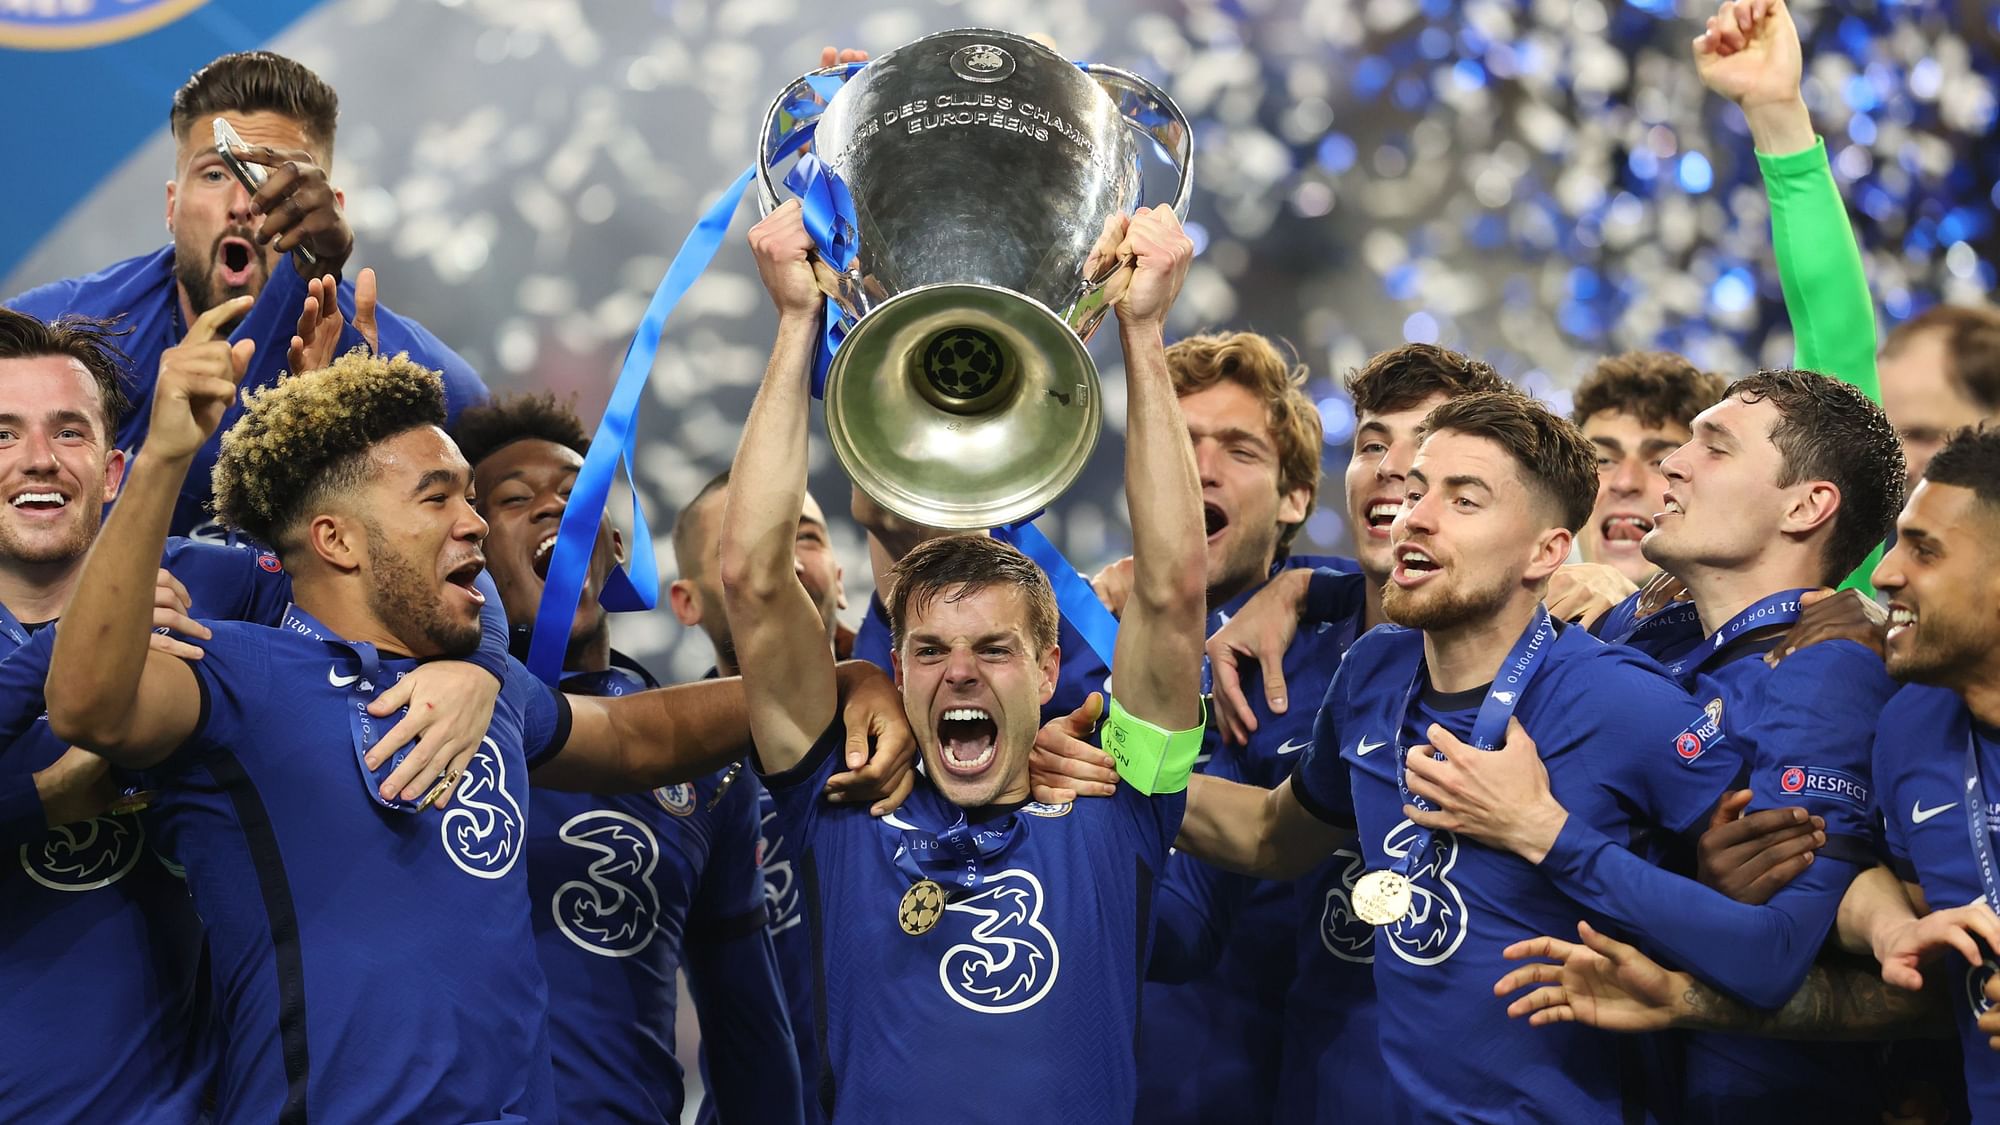 Chelsea won their second UEFA Champions League title after defeating Manchester City 1-0 in Porto.&nbsp;